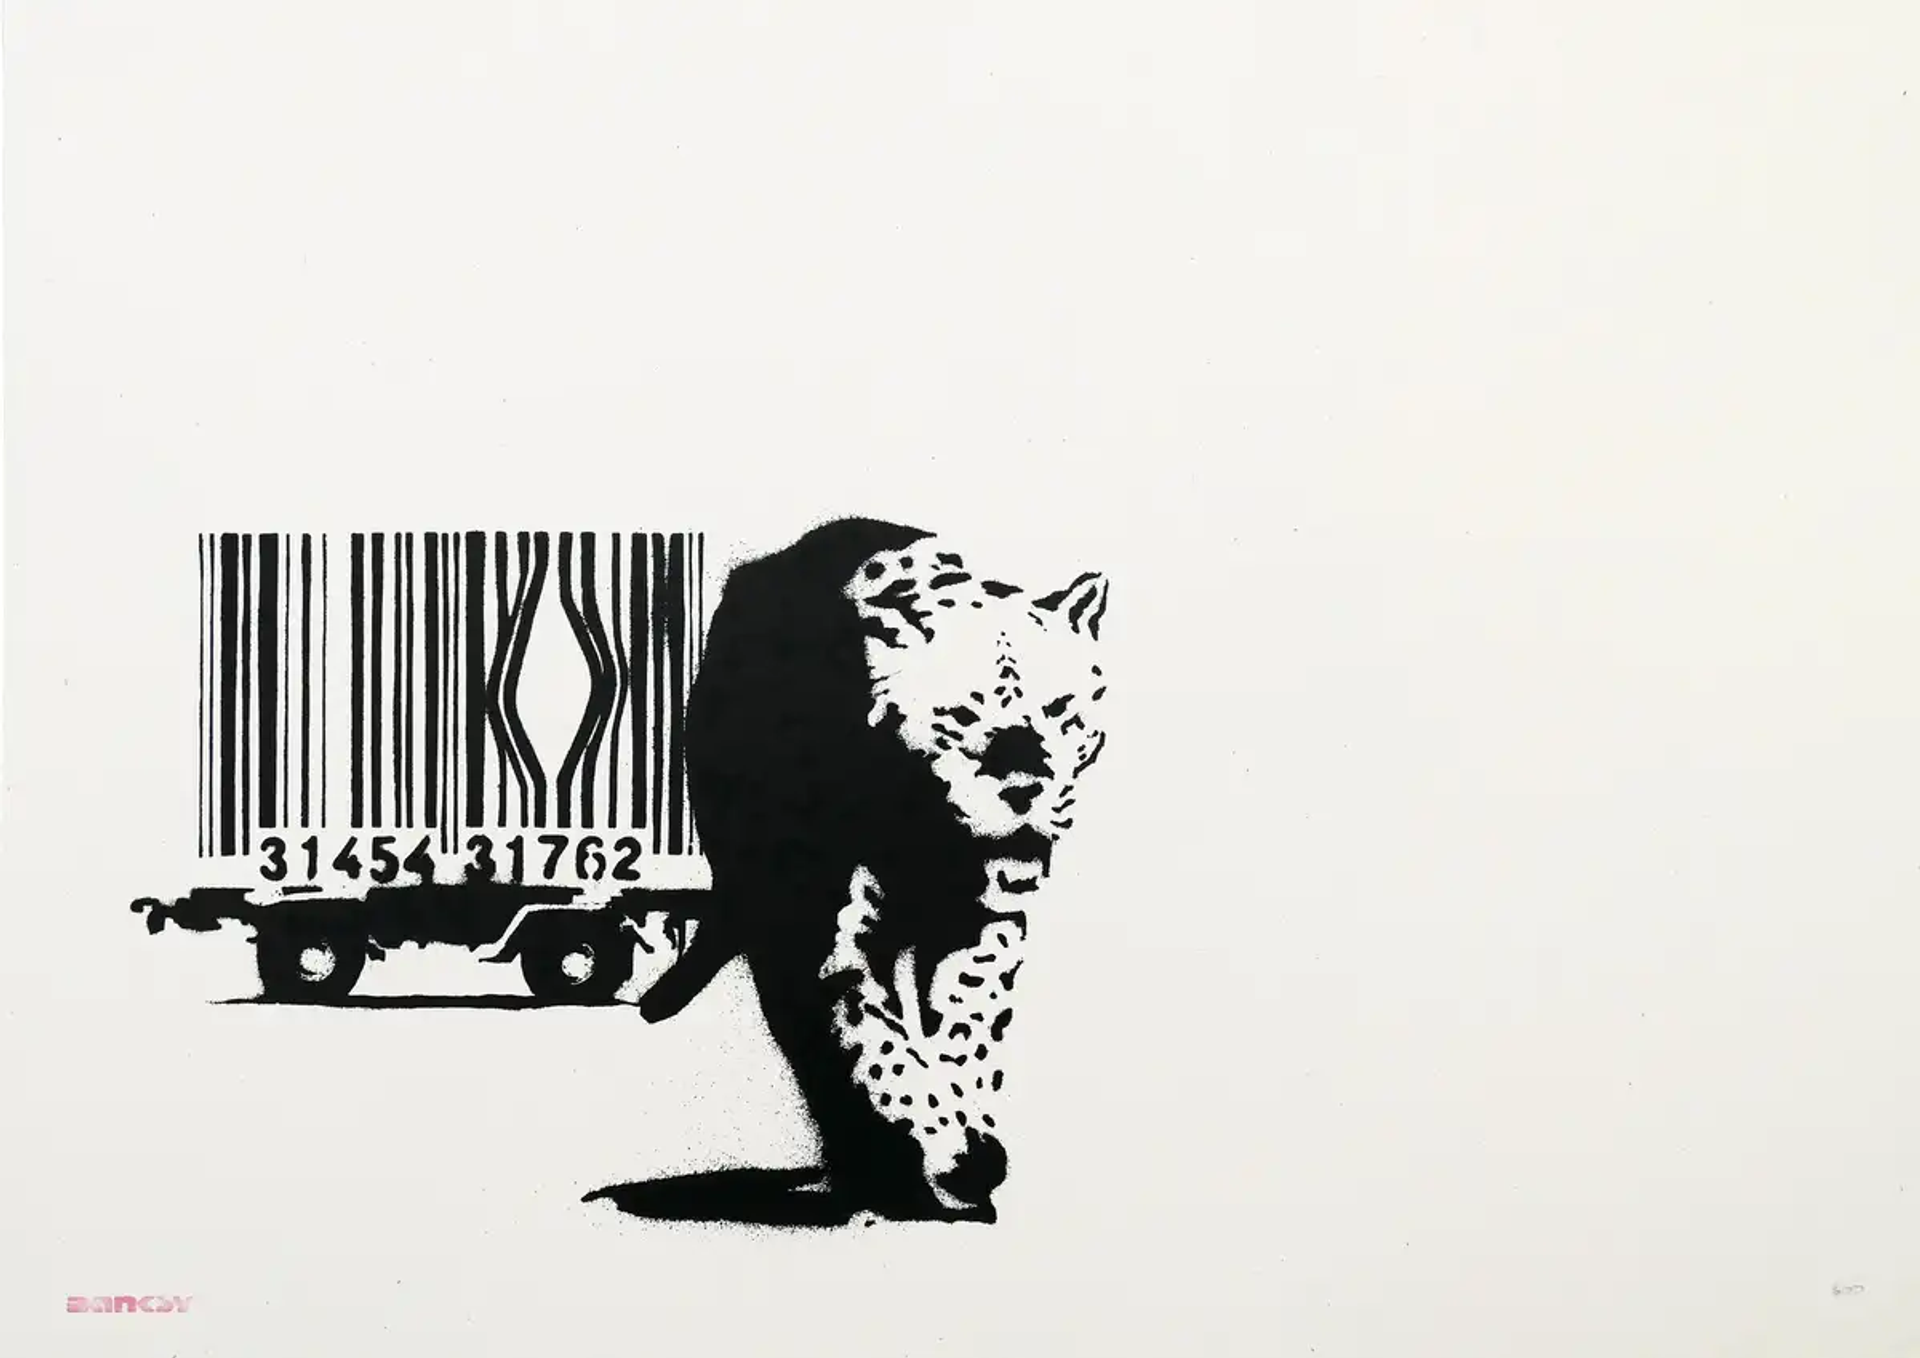 Banksy's Barcode is an unsigned screen print released in 2004, depicting a leopard emerging from a barcode resembling bent cage bars, in his signature monochromatic, stencilled style.